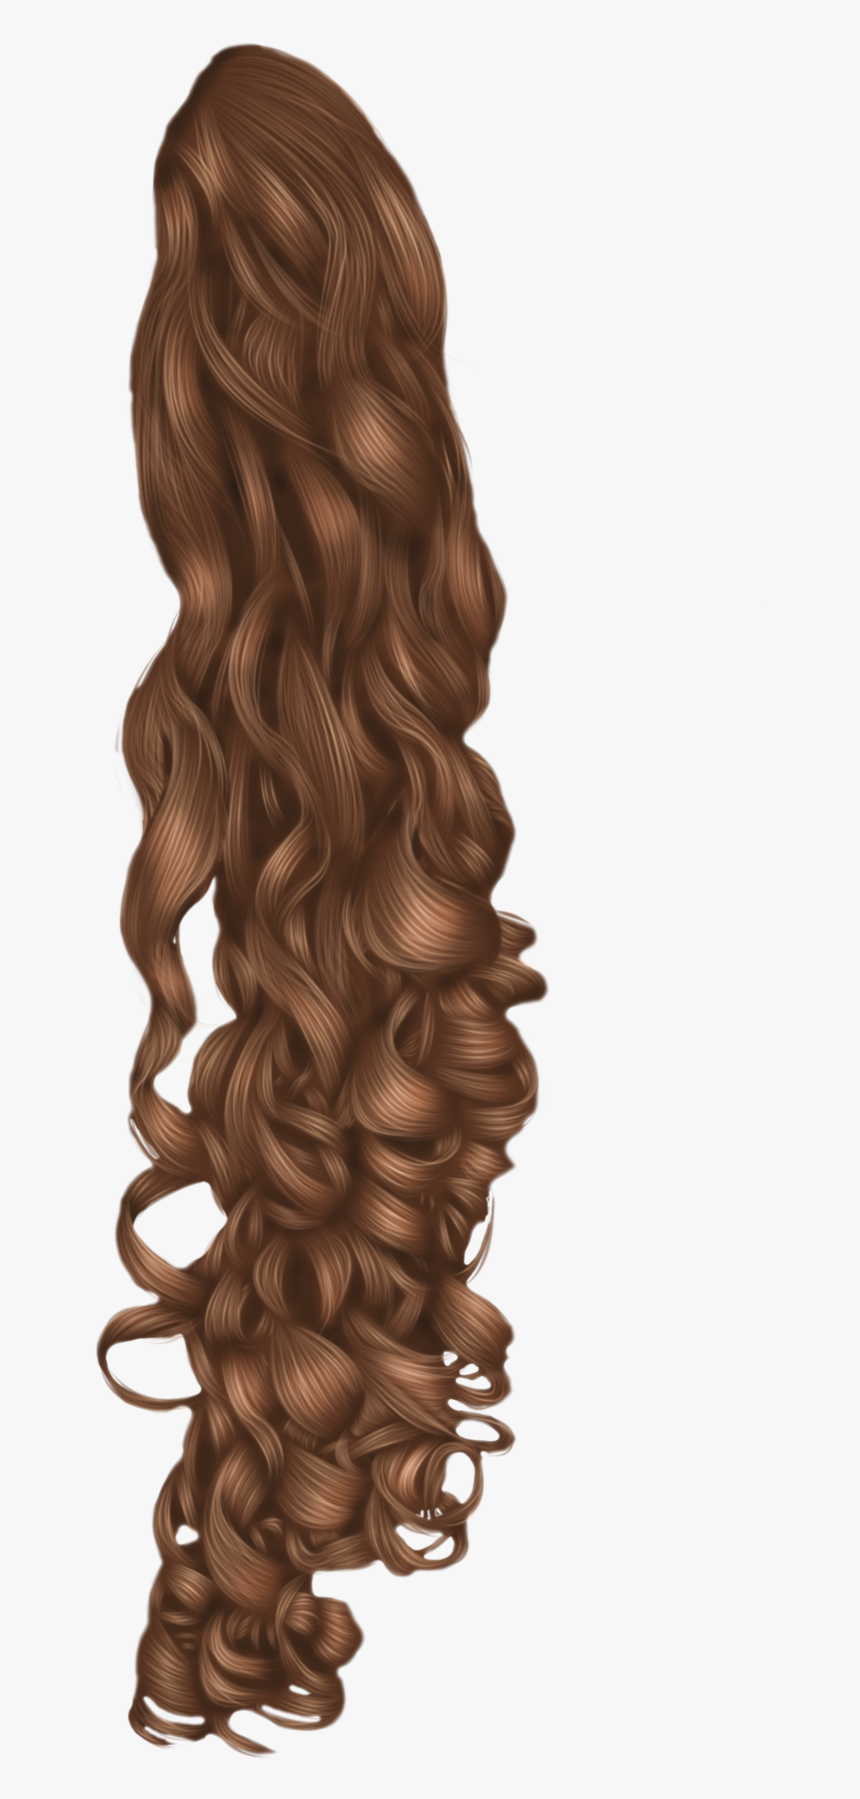 Black Hair Wig Hairstyle - Curly Hair Png Transparent, Png Download, Free Download